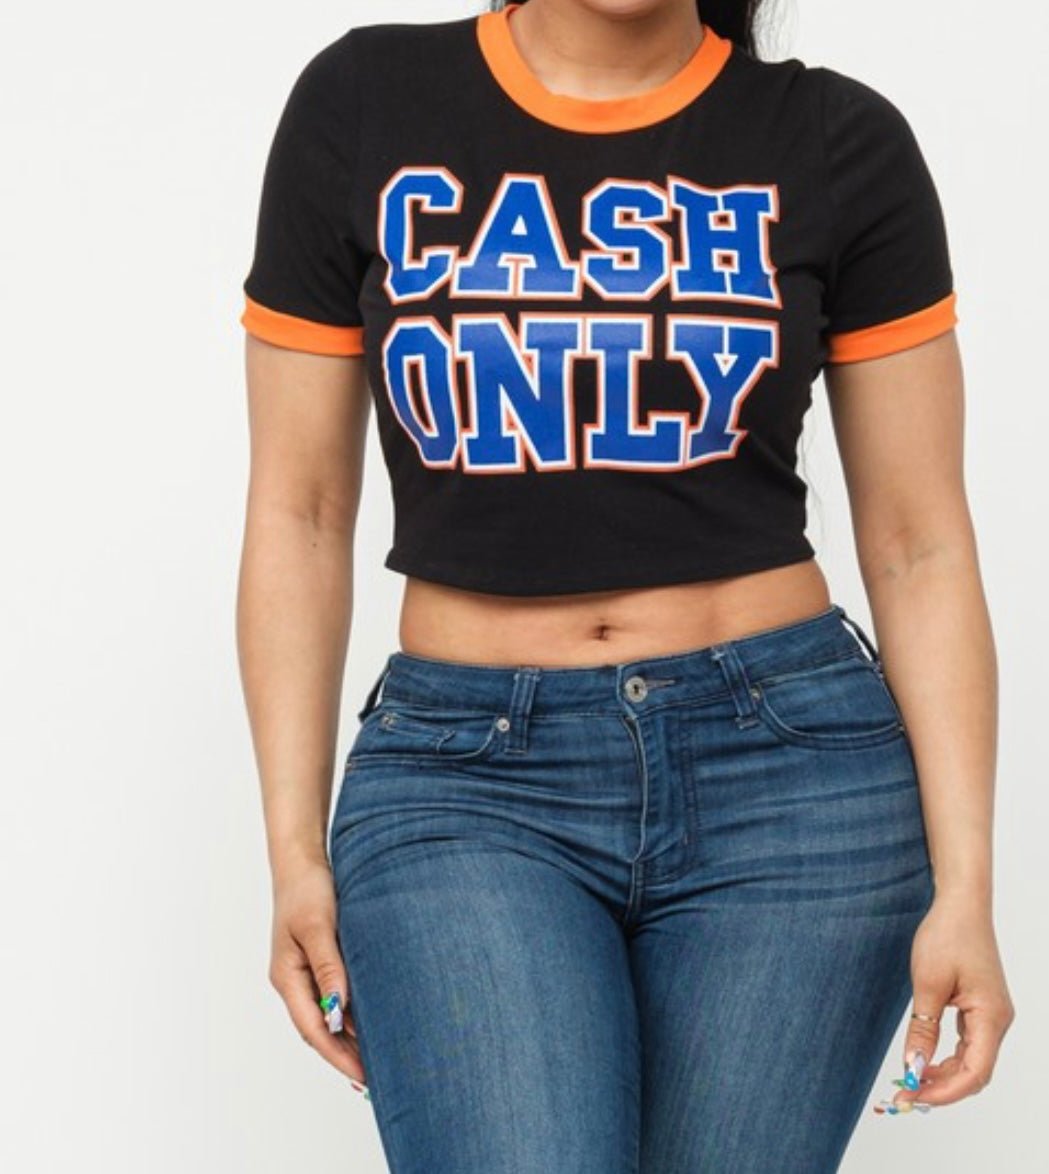 "Cash Out" Crop Tee - The Trap Doll Hou$e Boutique"Cash Out" Crop Tee